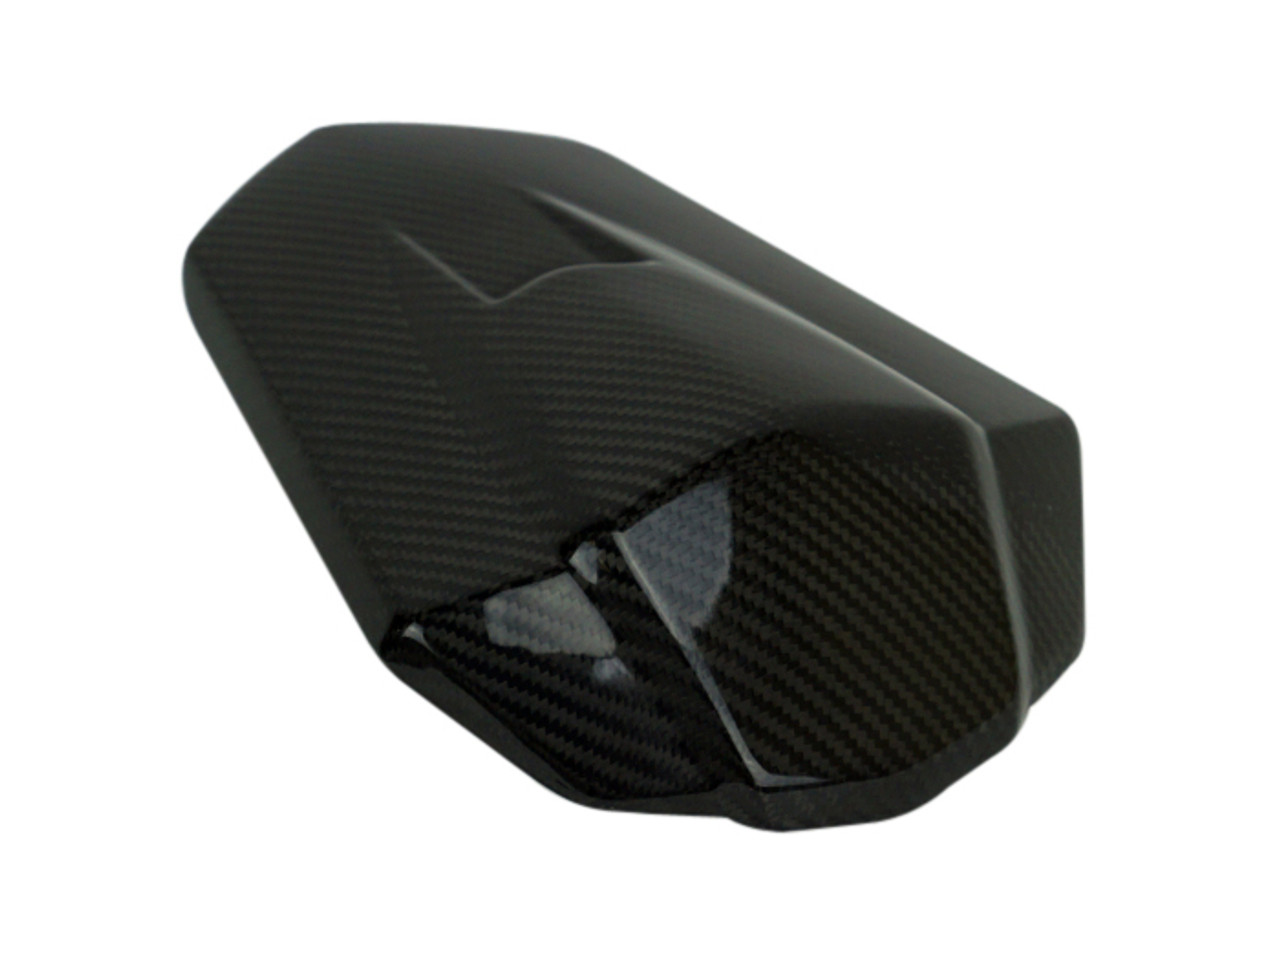 Seat Cowl in Glossy Twill Weave shown for Honda CBR1000RR 2017+.